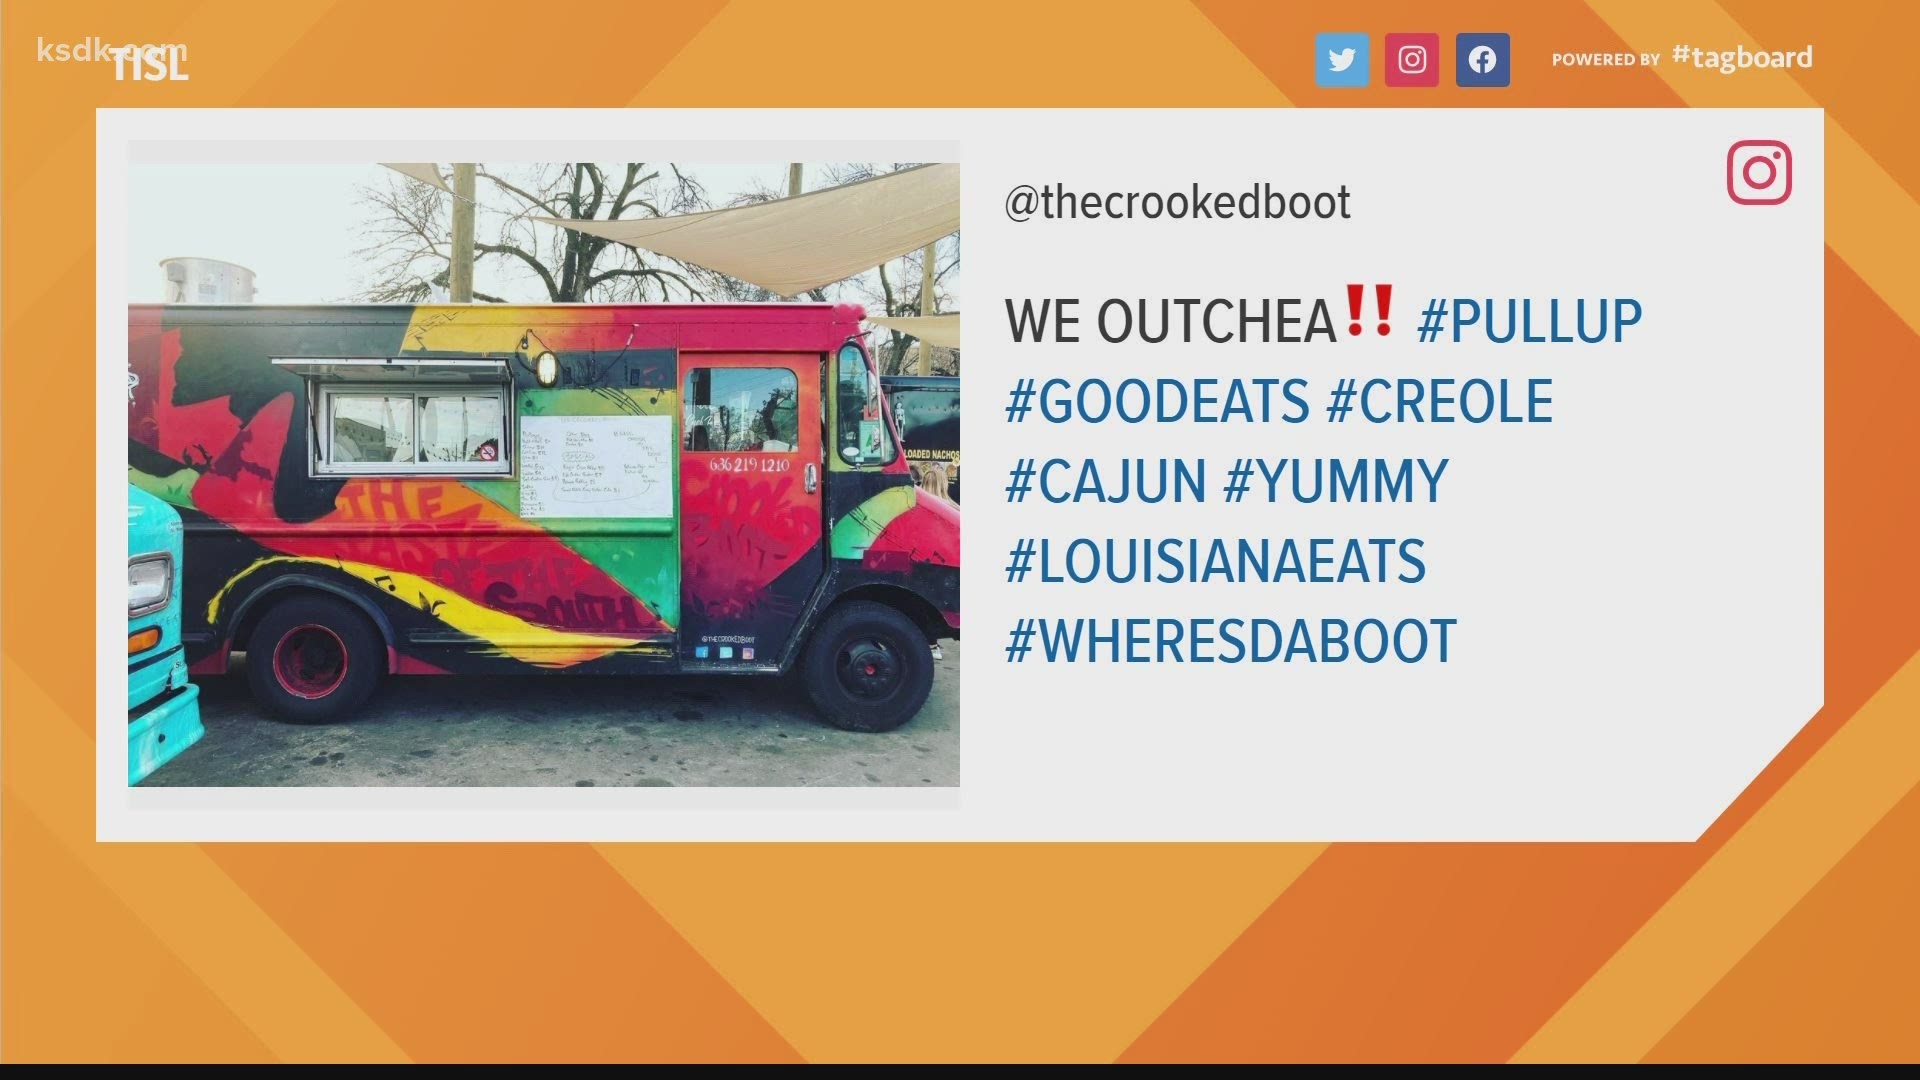 A St. Louis area food truck was chosen to receive $25,000 as part of Discover's 'Eat It Forward' program